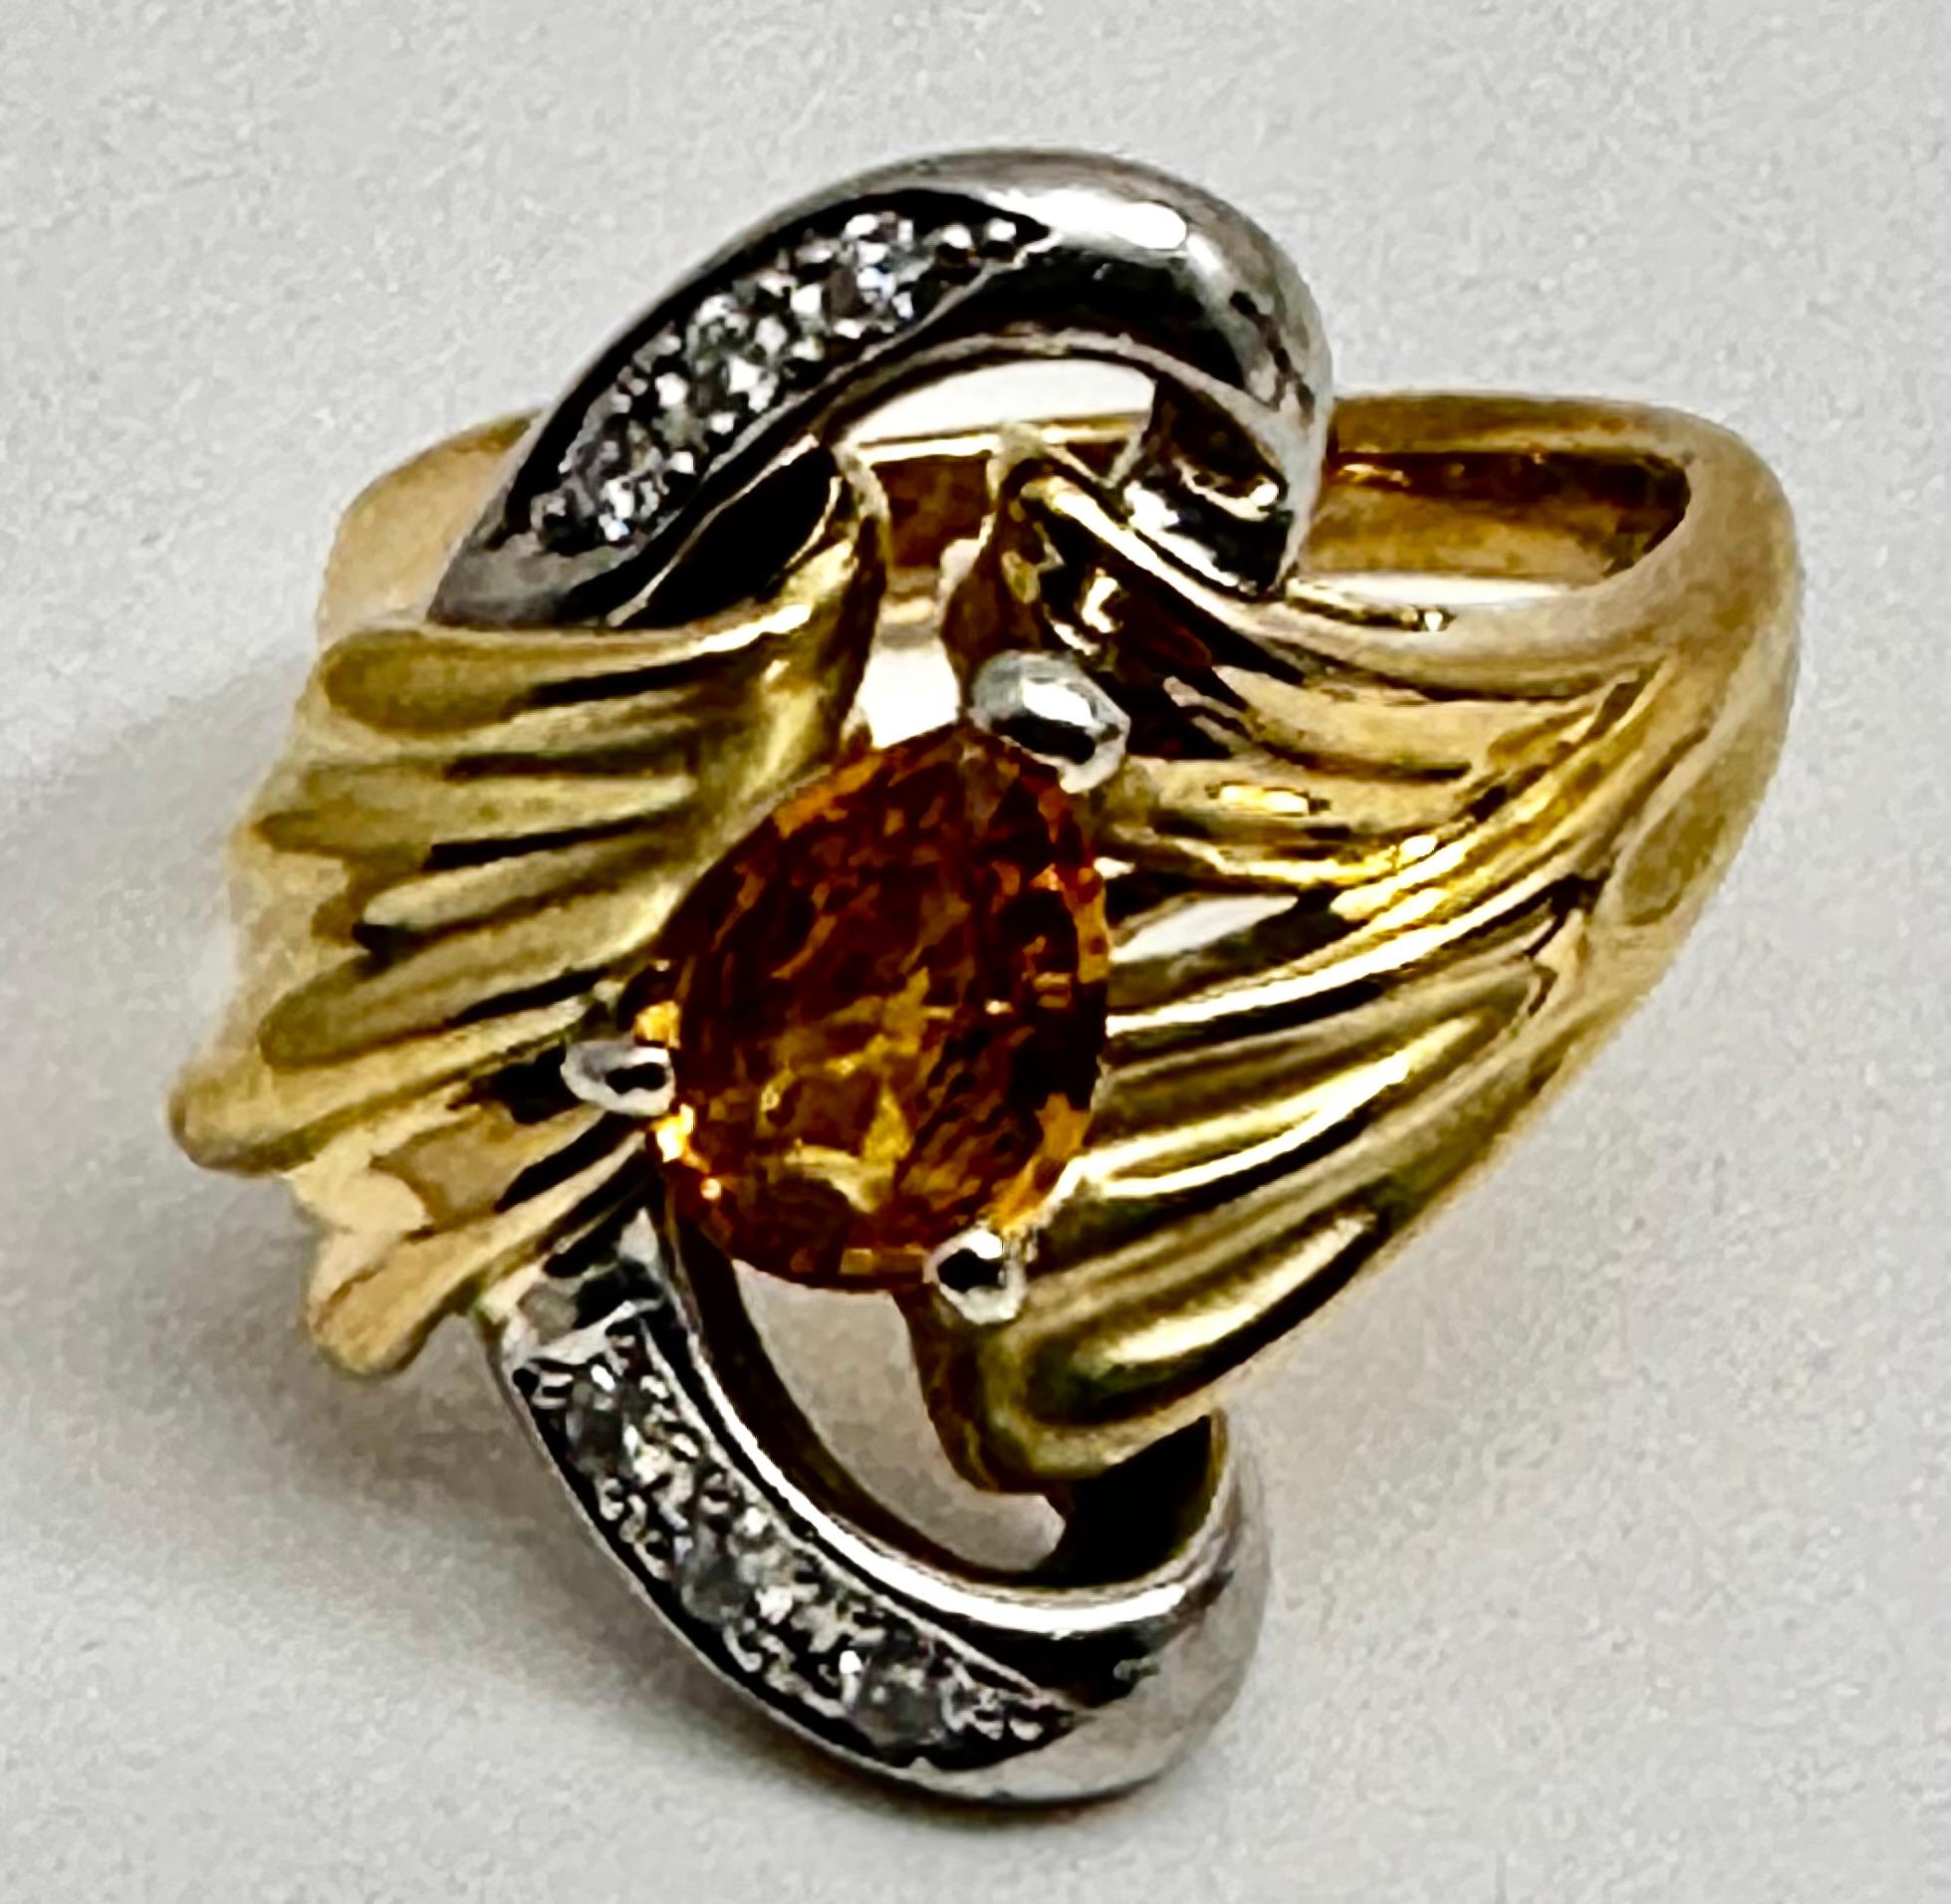 Pear Cut 18kt Yellow Gold ~ Platinum 900 ~ 6x8mm Citrine ~ 6 Diamonds ~ Ring Size 6 1/4 For Sale